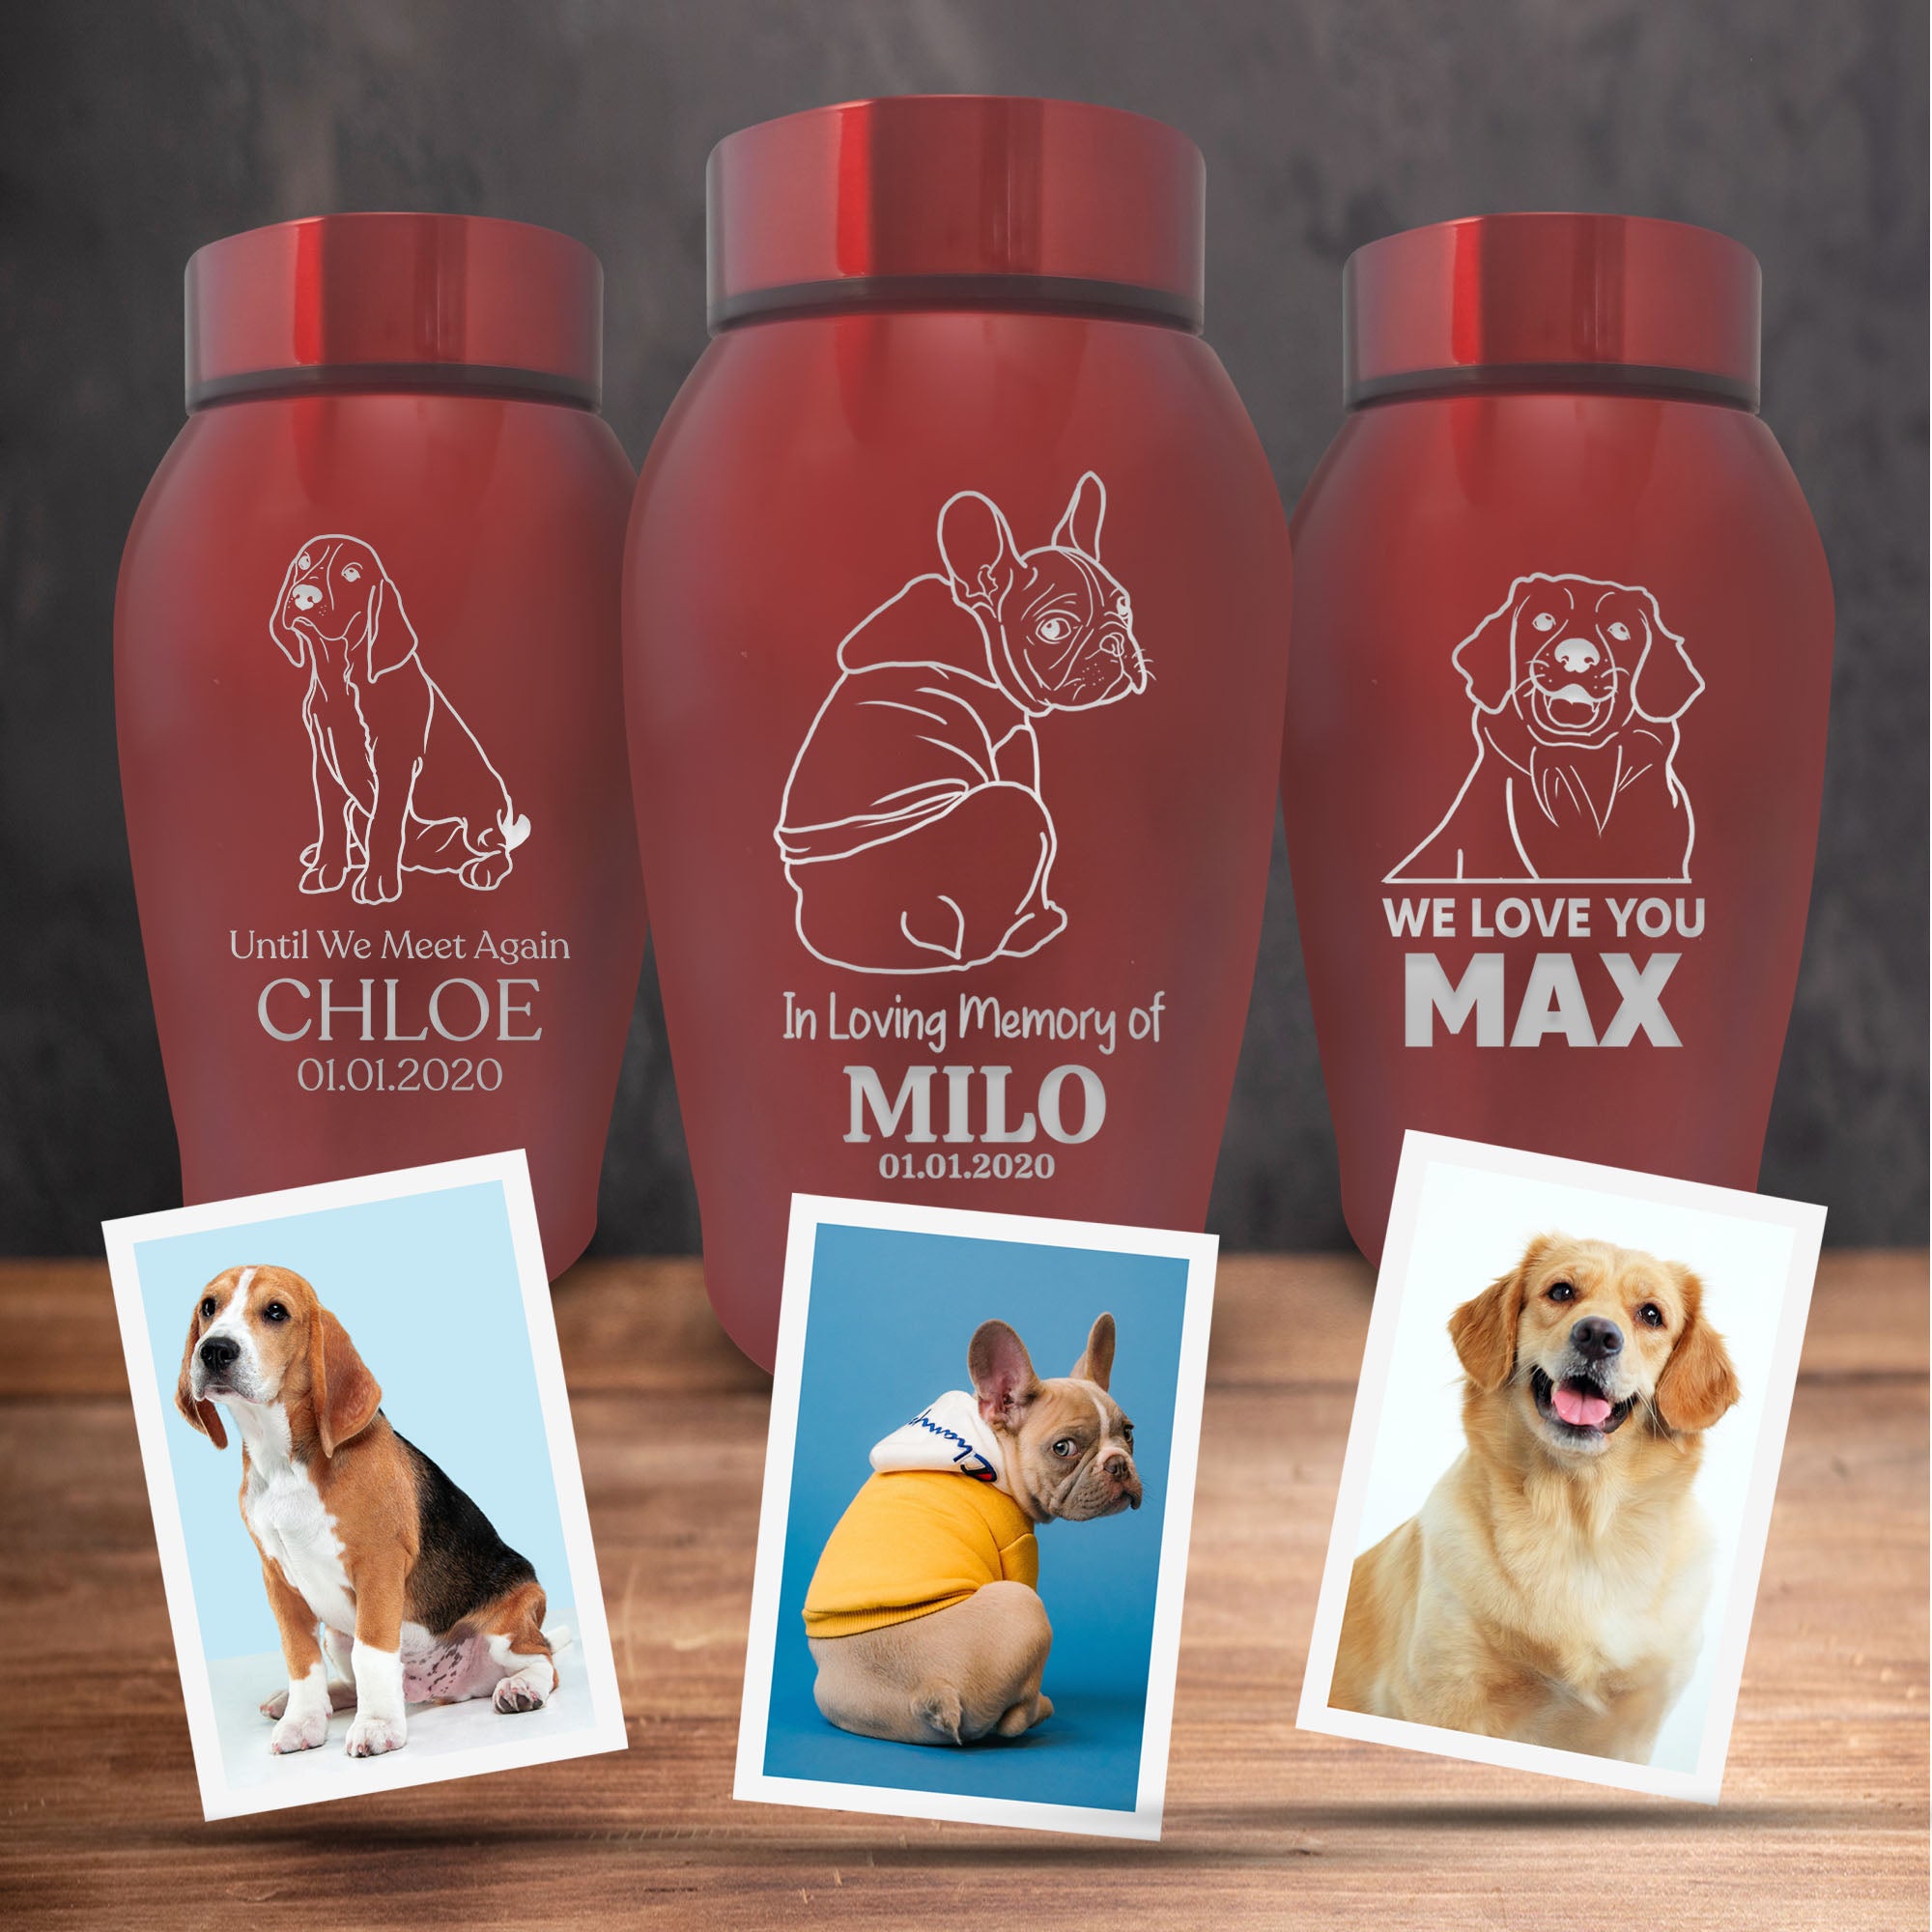 Custom Engraved Pet Urn: Personalized with Your Pet Photo/Image, Name, and Date - Stainless Steel Cremation Urns for Pets Ashes with Airtight Closure, Up to 50 Lbs Capacity | Black,Red.Teal, 7" x 5"